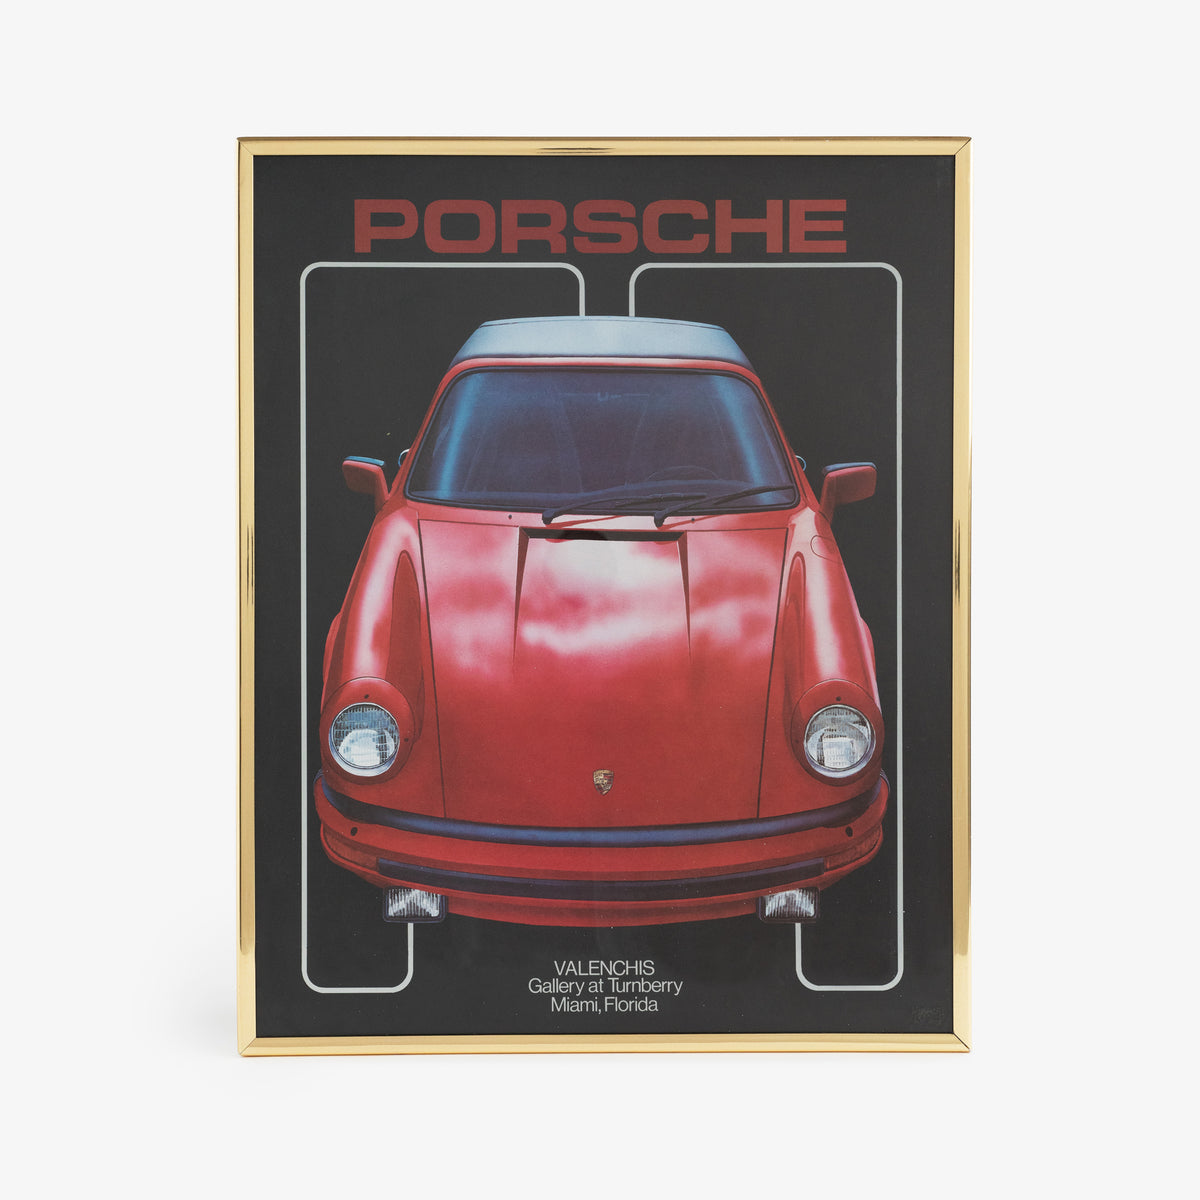 Porsche Valenchis Gallery at Turnberry Poster – Aimé Leon Dore